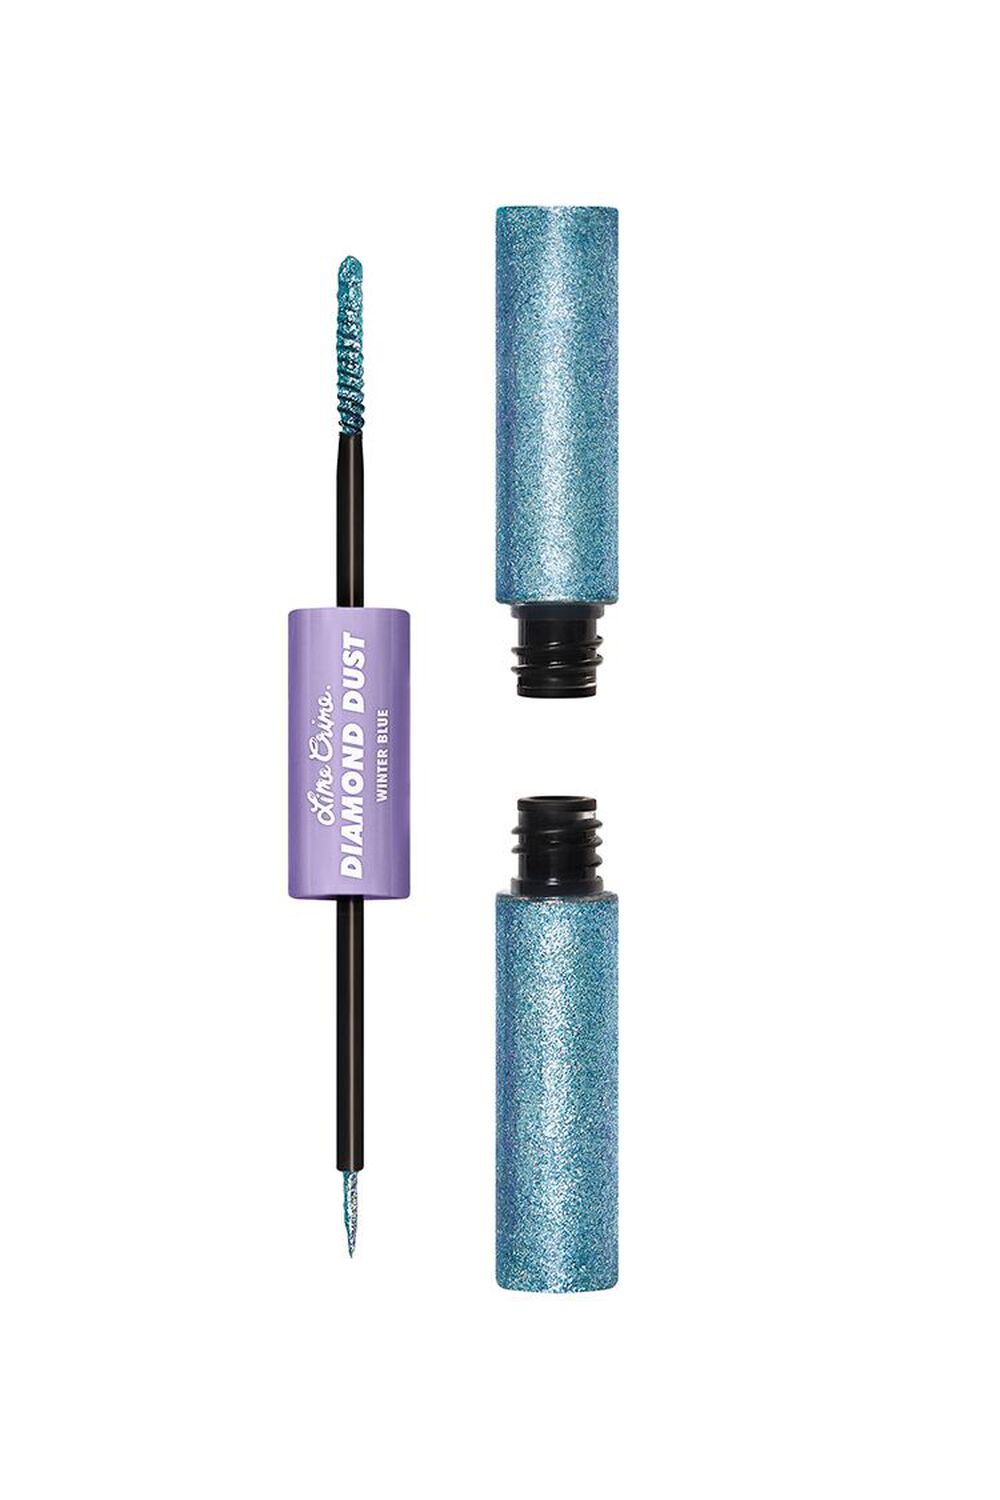 Lime Crime Diamond Dust Iridescent Eye and Brow Topper , image 3